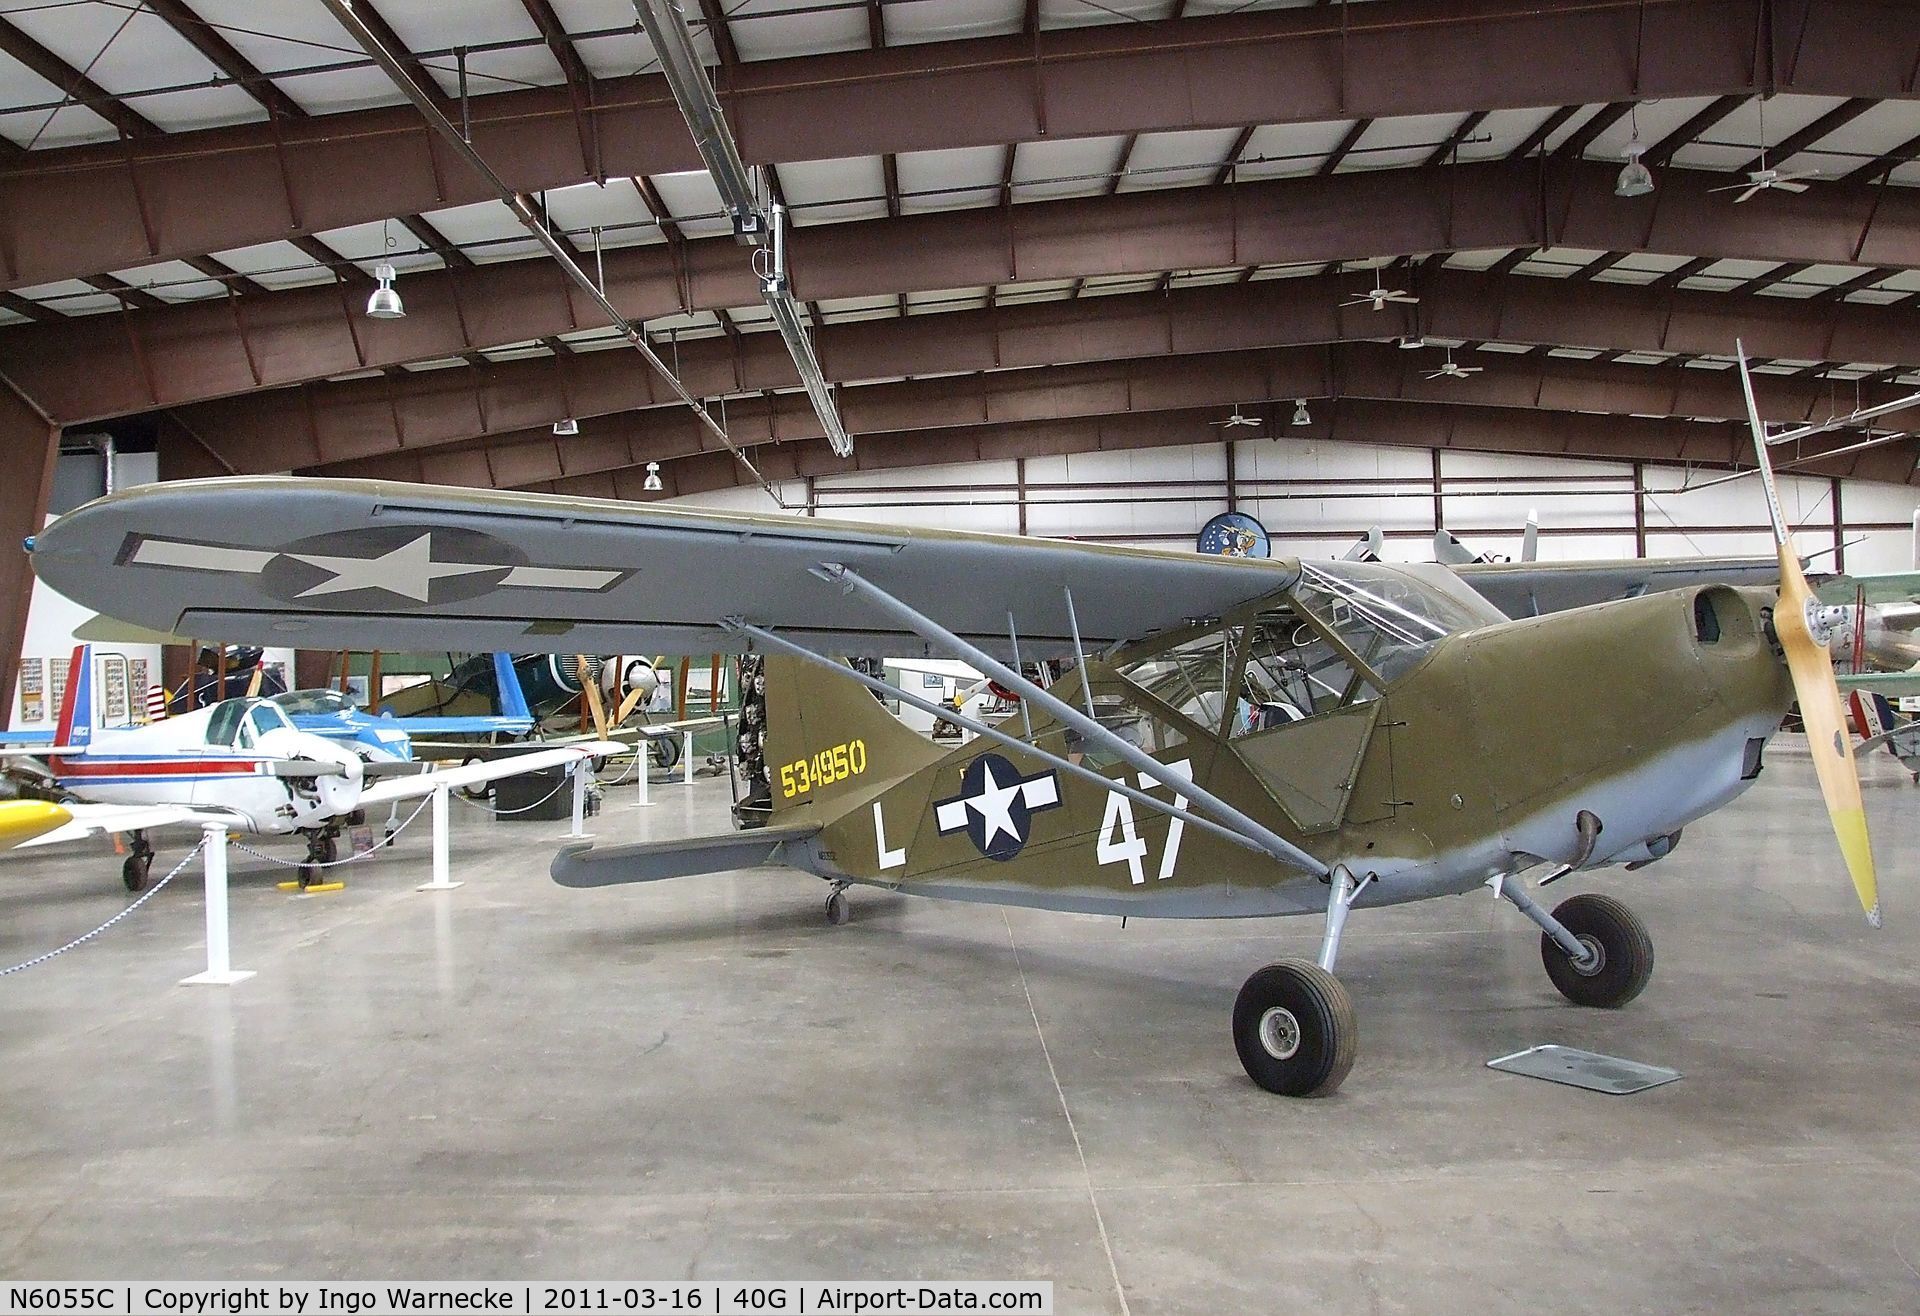 N6055C, 1945 Stinson U-19B (L-5G) C/N Not found 45-34950/N6055C, Stinson L-5G Sentinel at the Planes of Fame Air Museum, Valle AZ